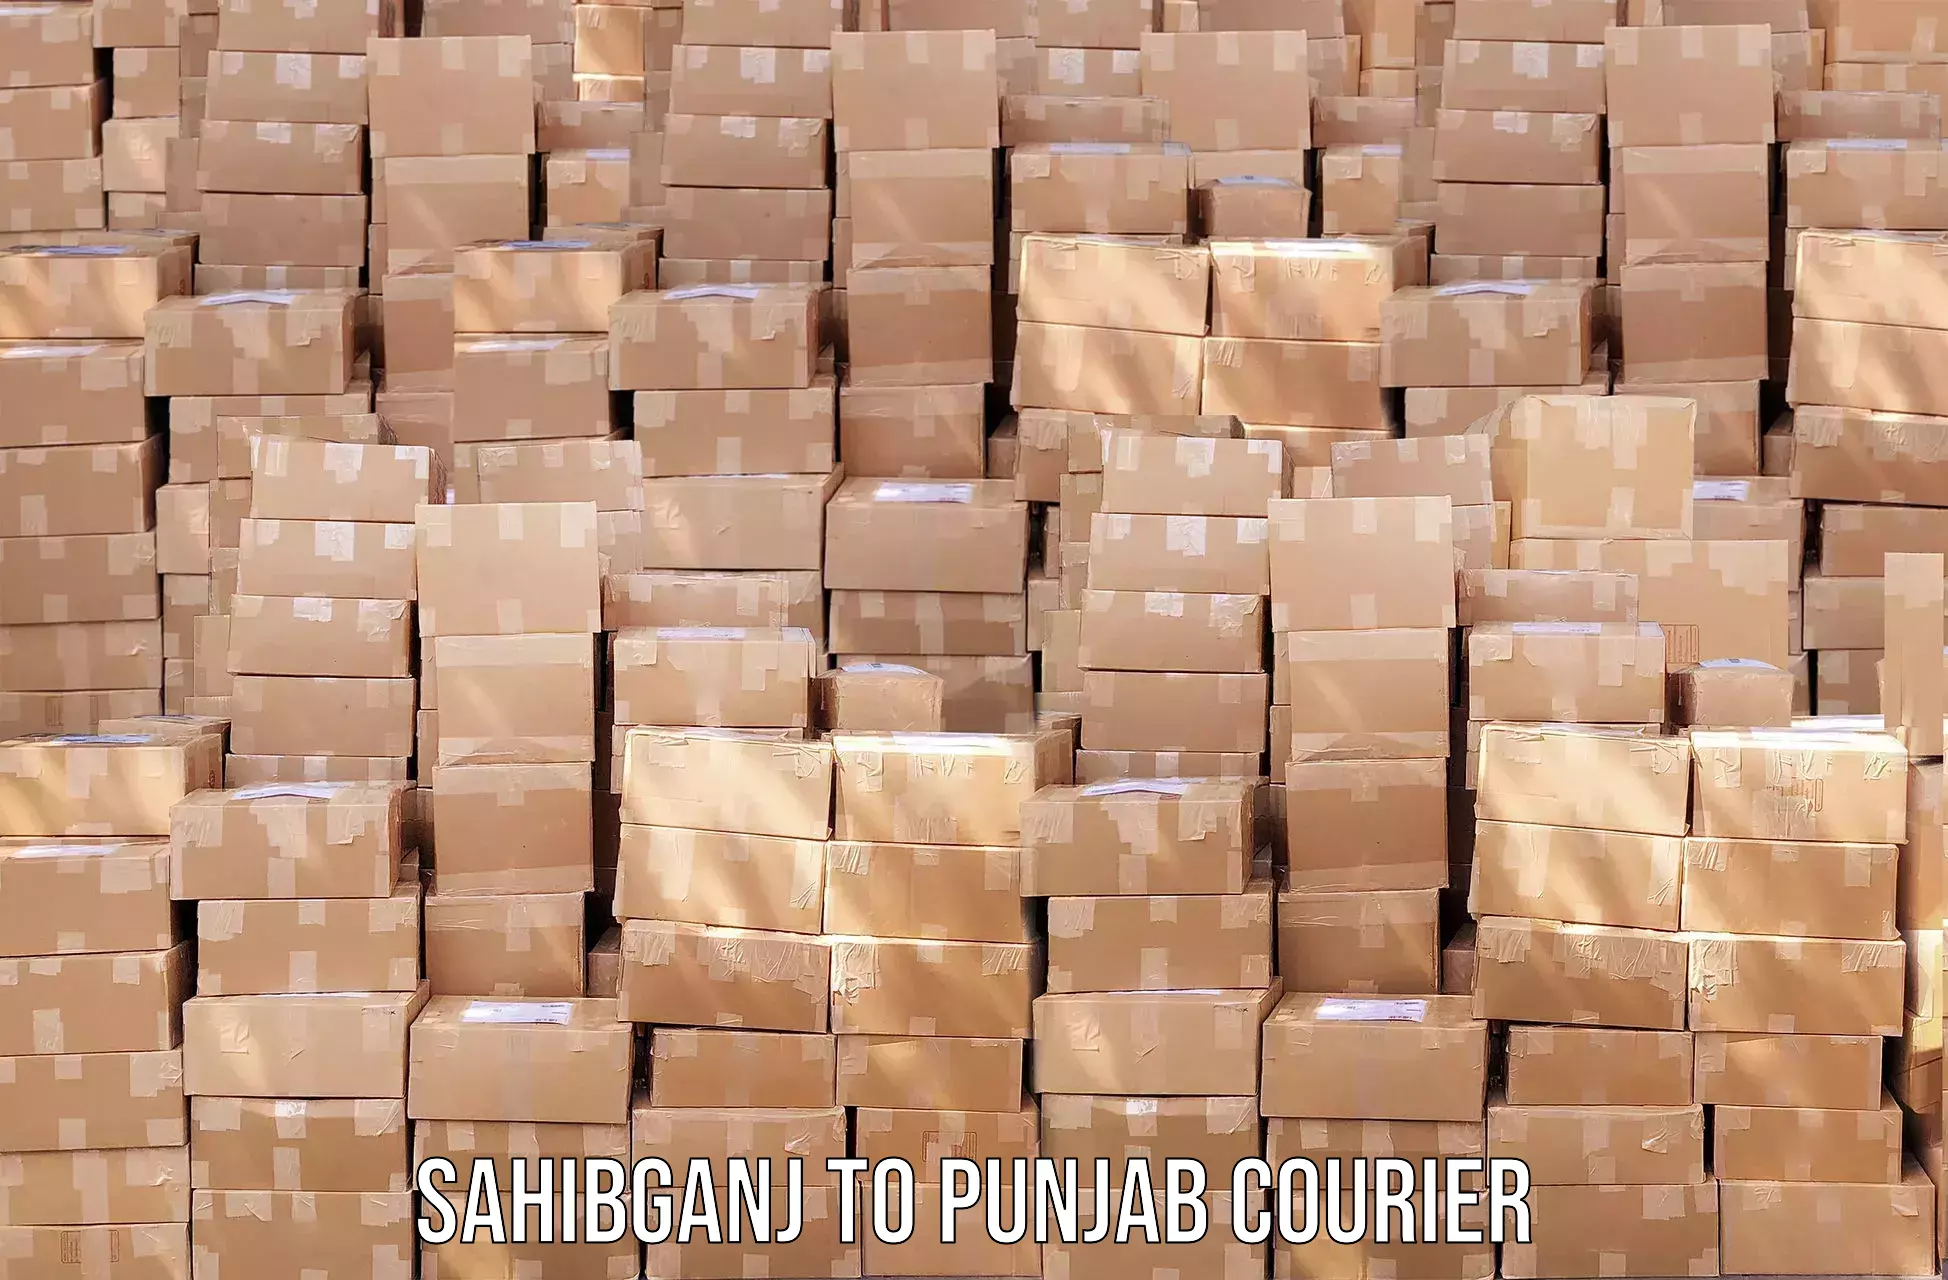 Package delivery network Sahibganj to Pathankot